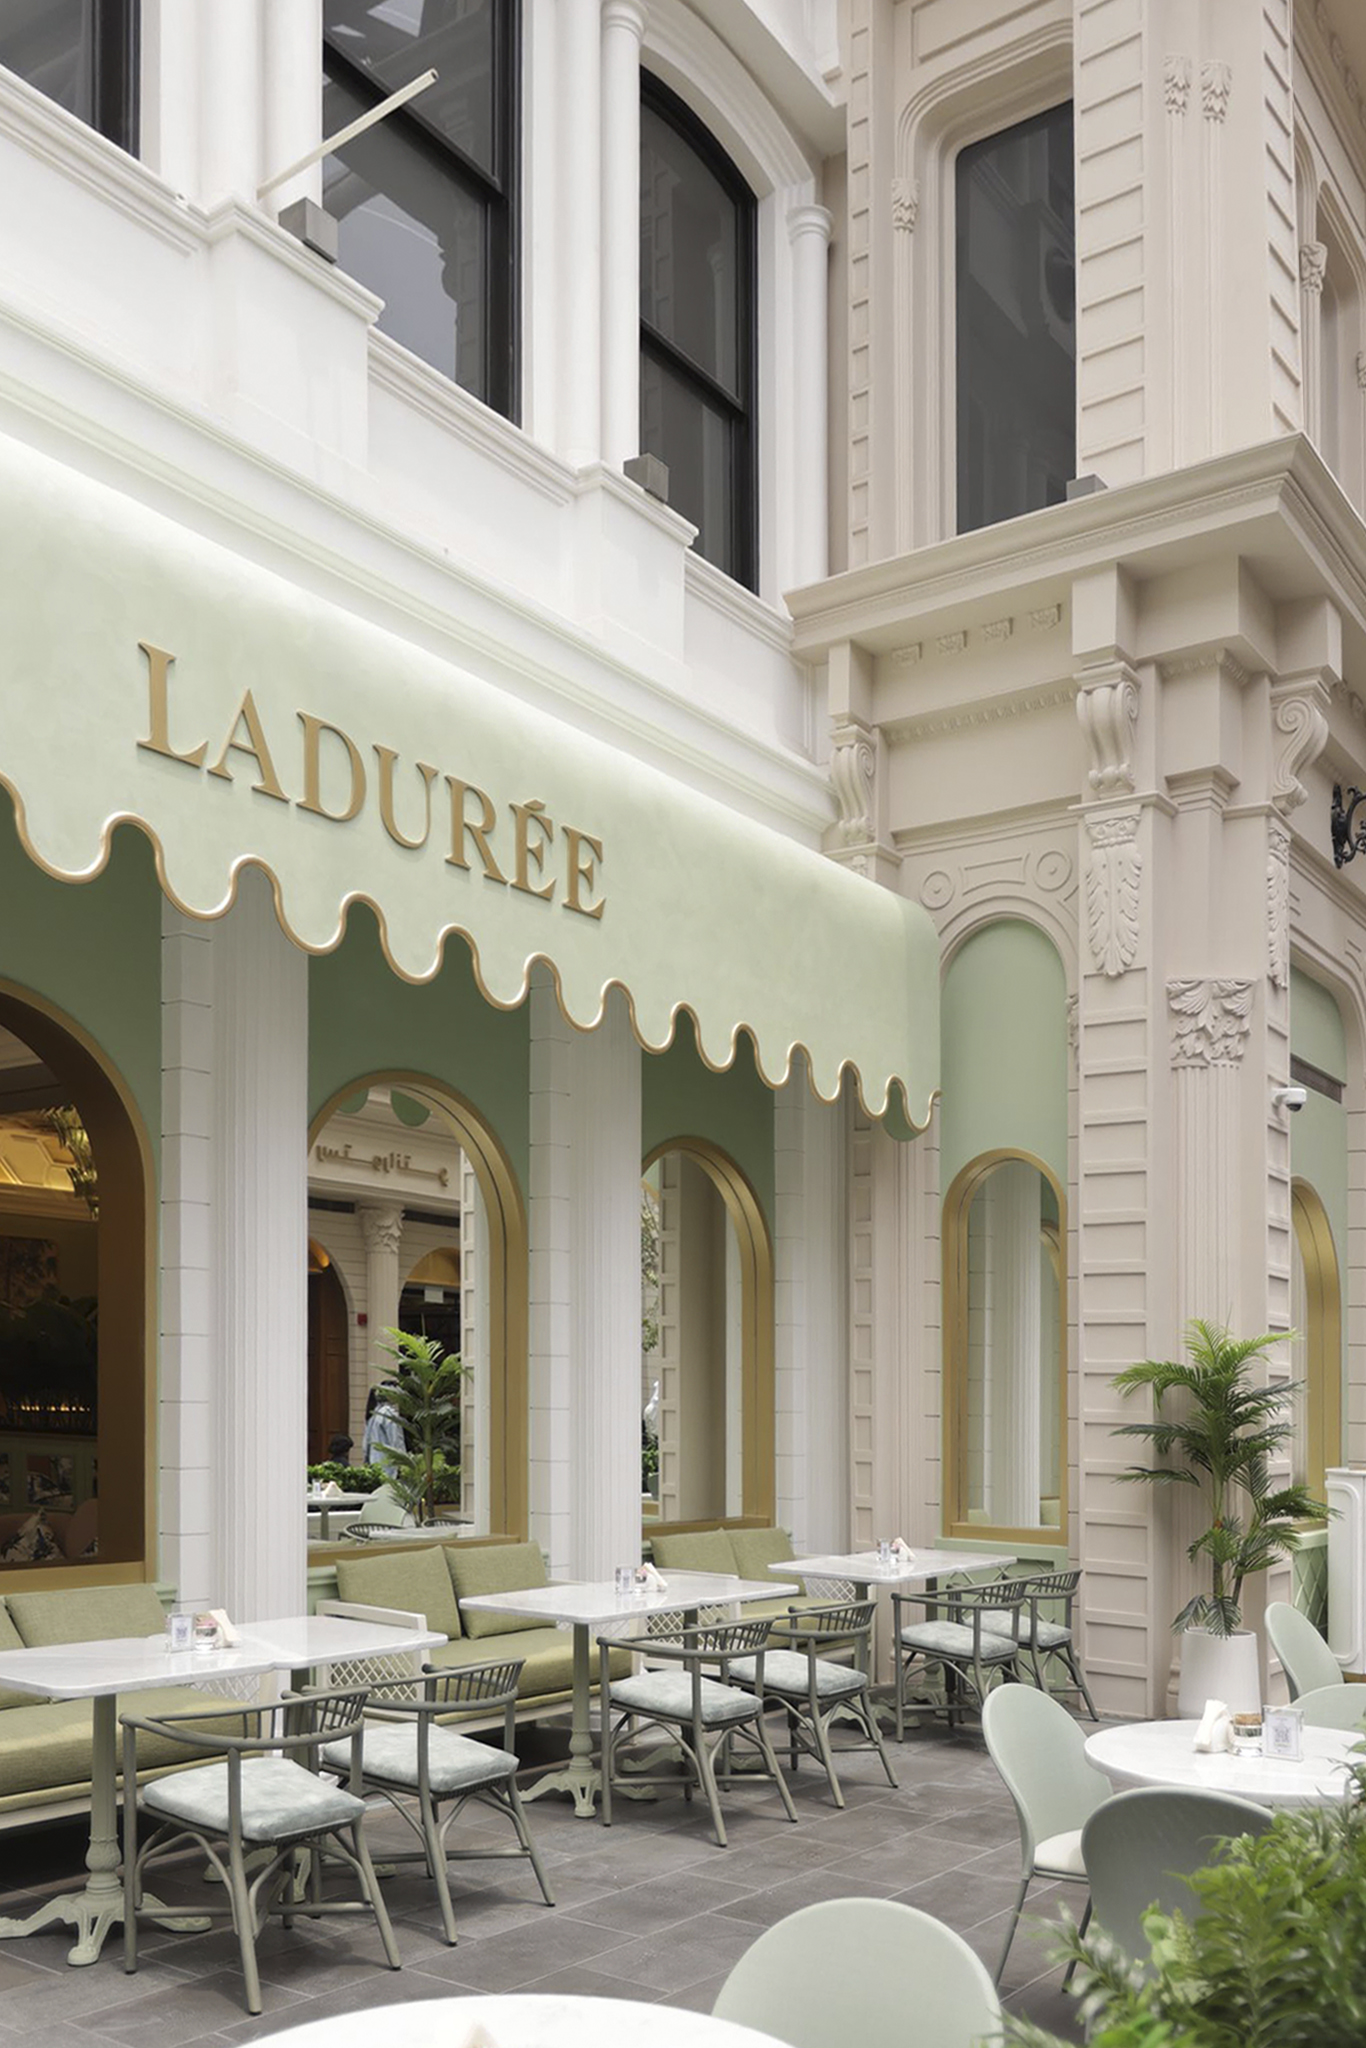 projects - indoor furniture projects - mediterranean furniture and macarons in ladurée